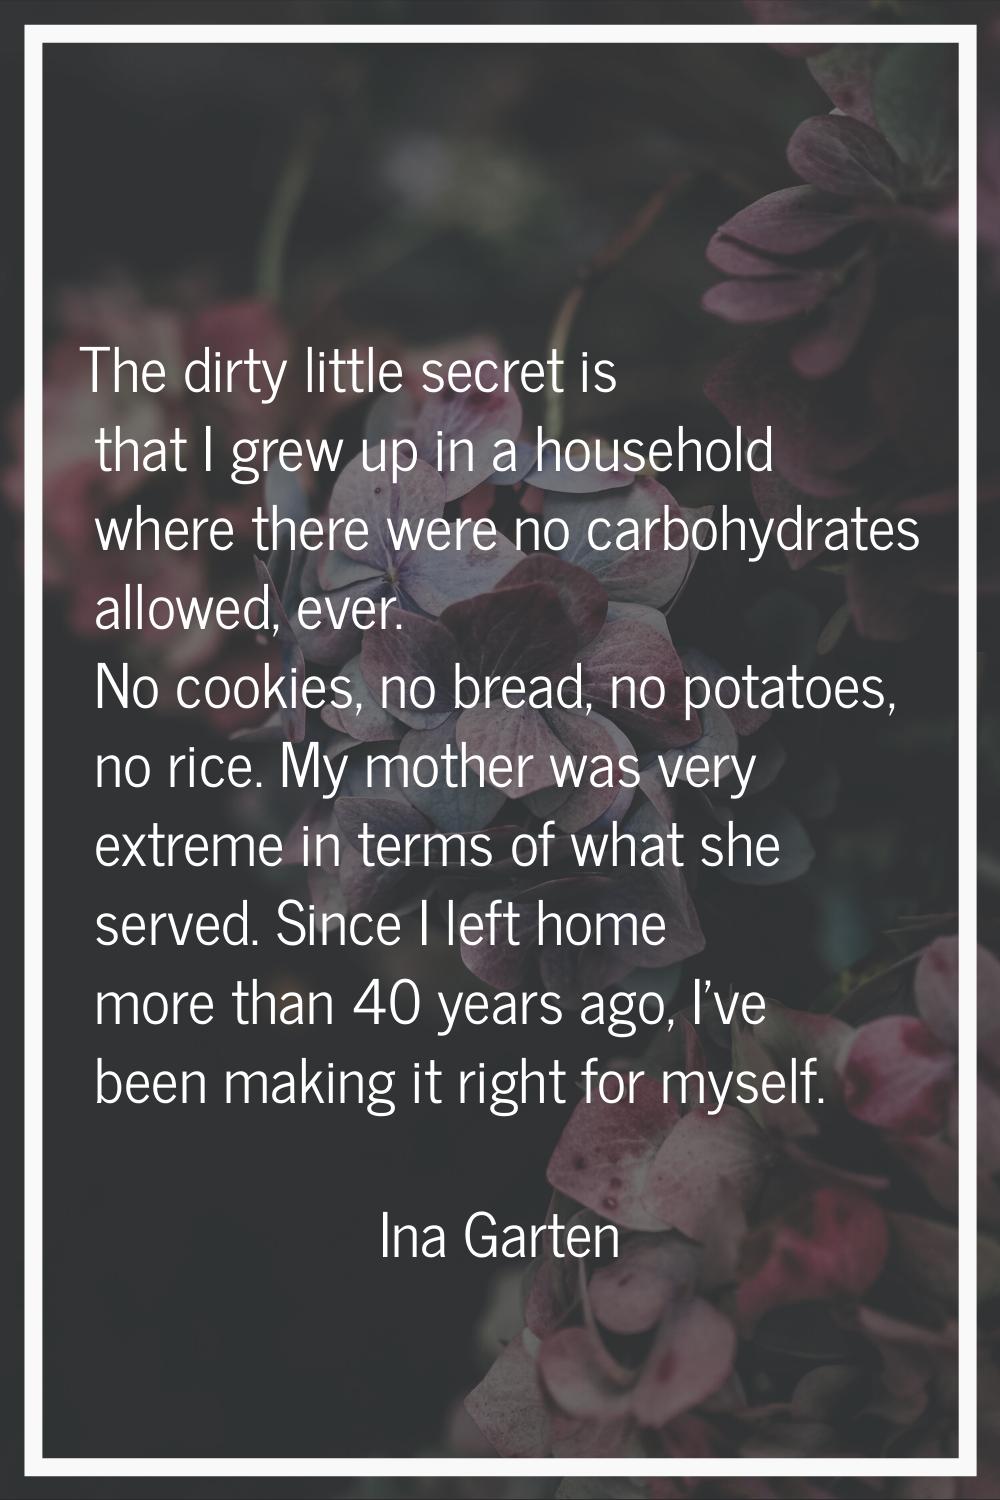 The dirty little secret is that I grew up in a household where there were no carbohydrates allowed,